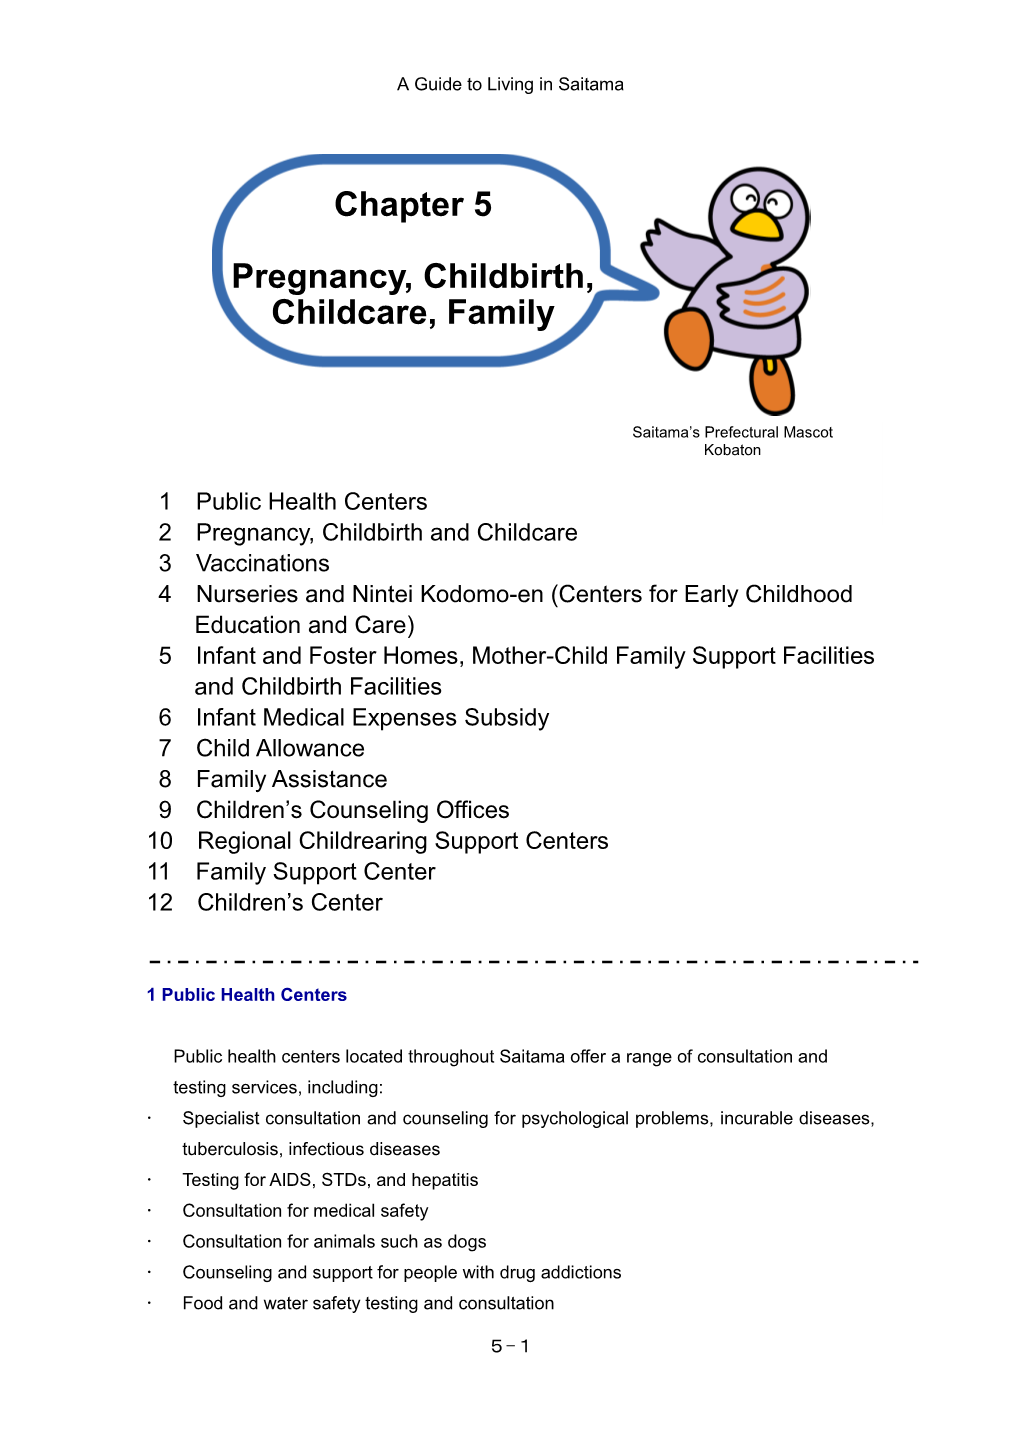 Chapter 5 Pregnancy, Childbirth, Childcare, Family